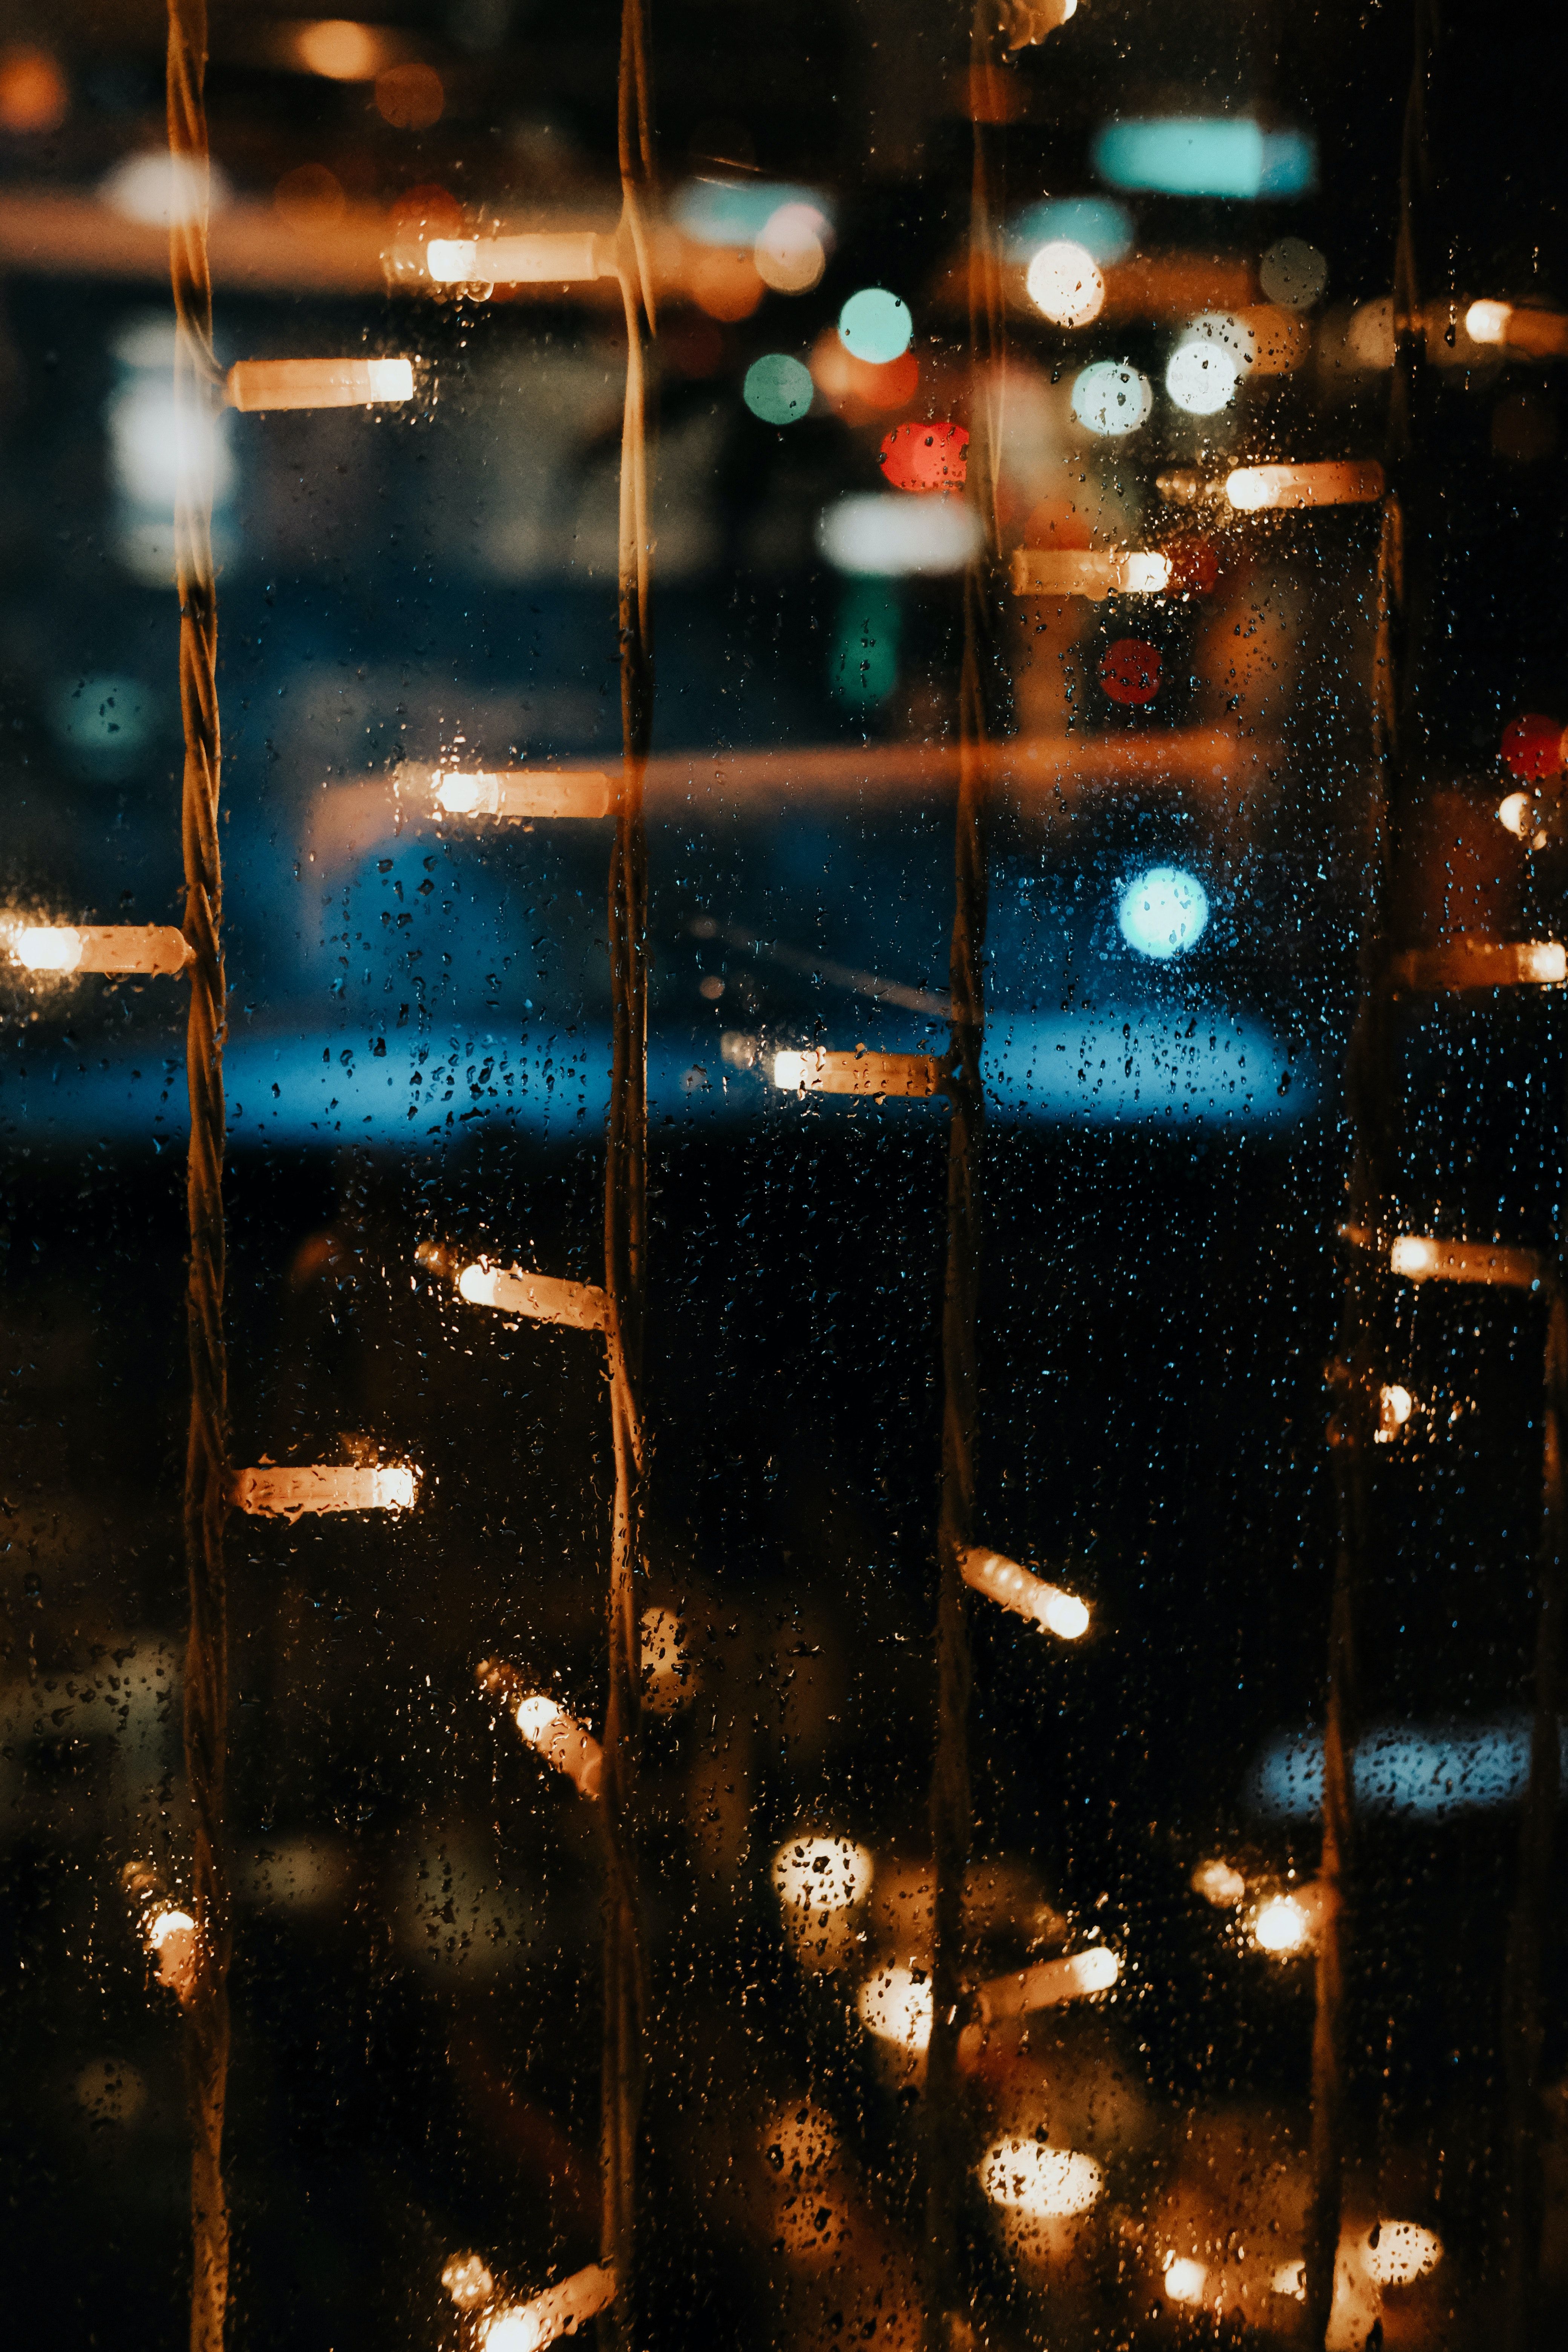 Blurry City Lights From Behind a Rainy Window at Night · Free